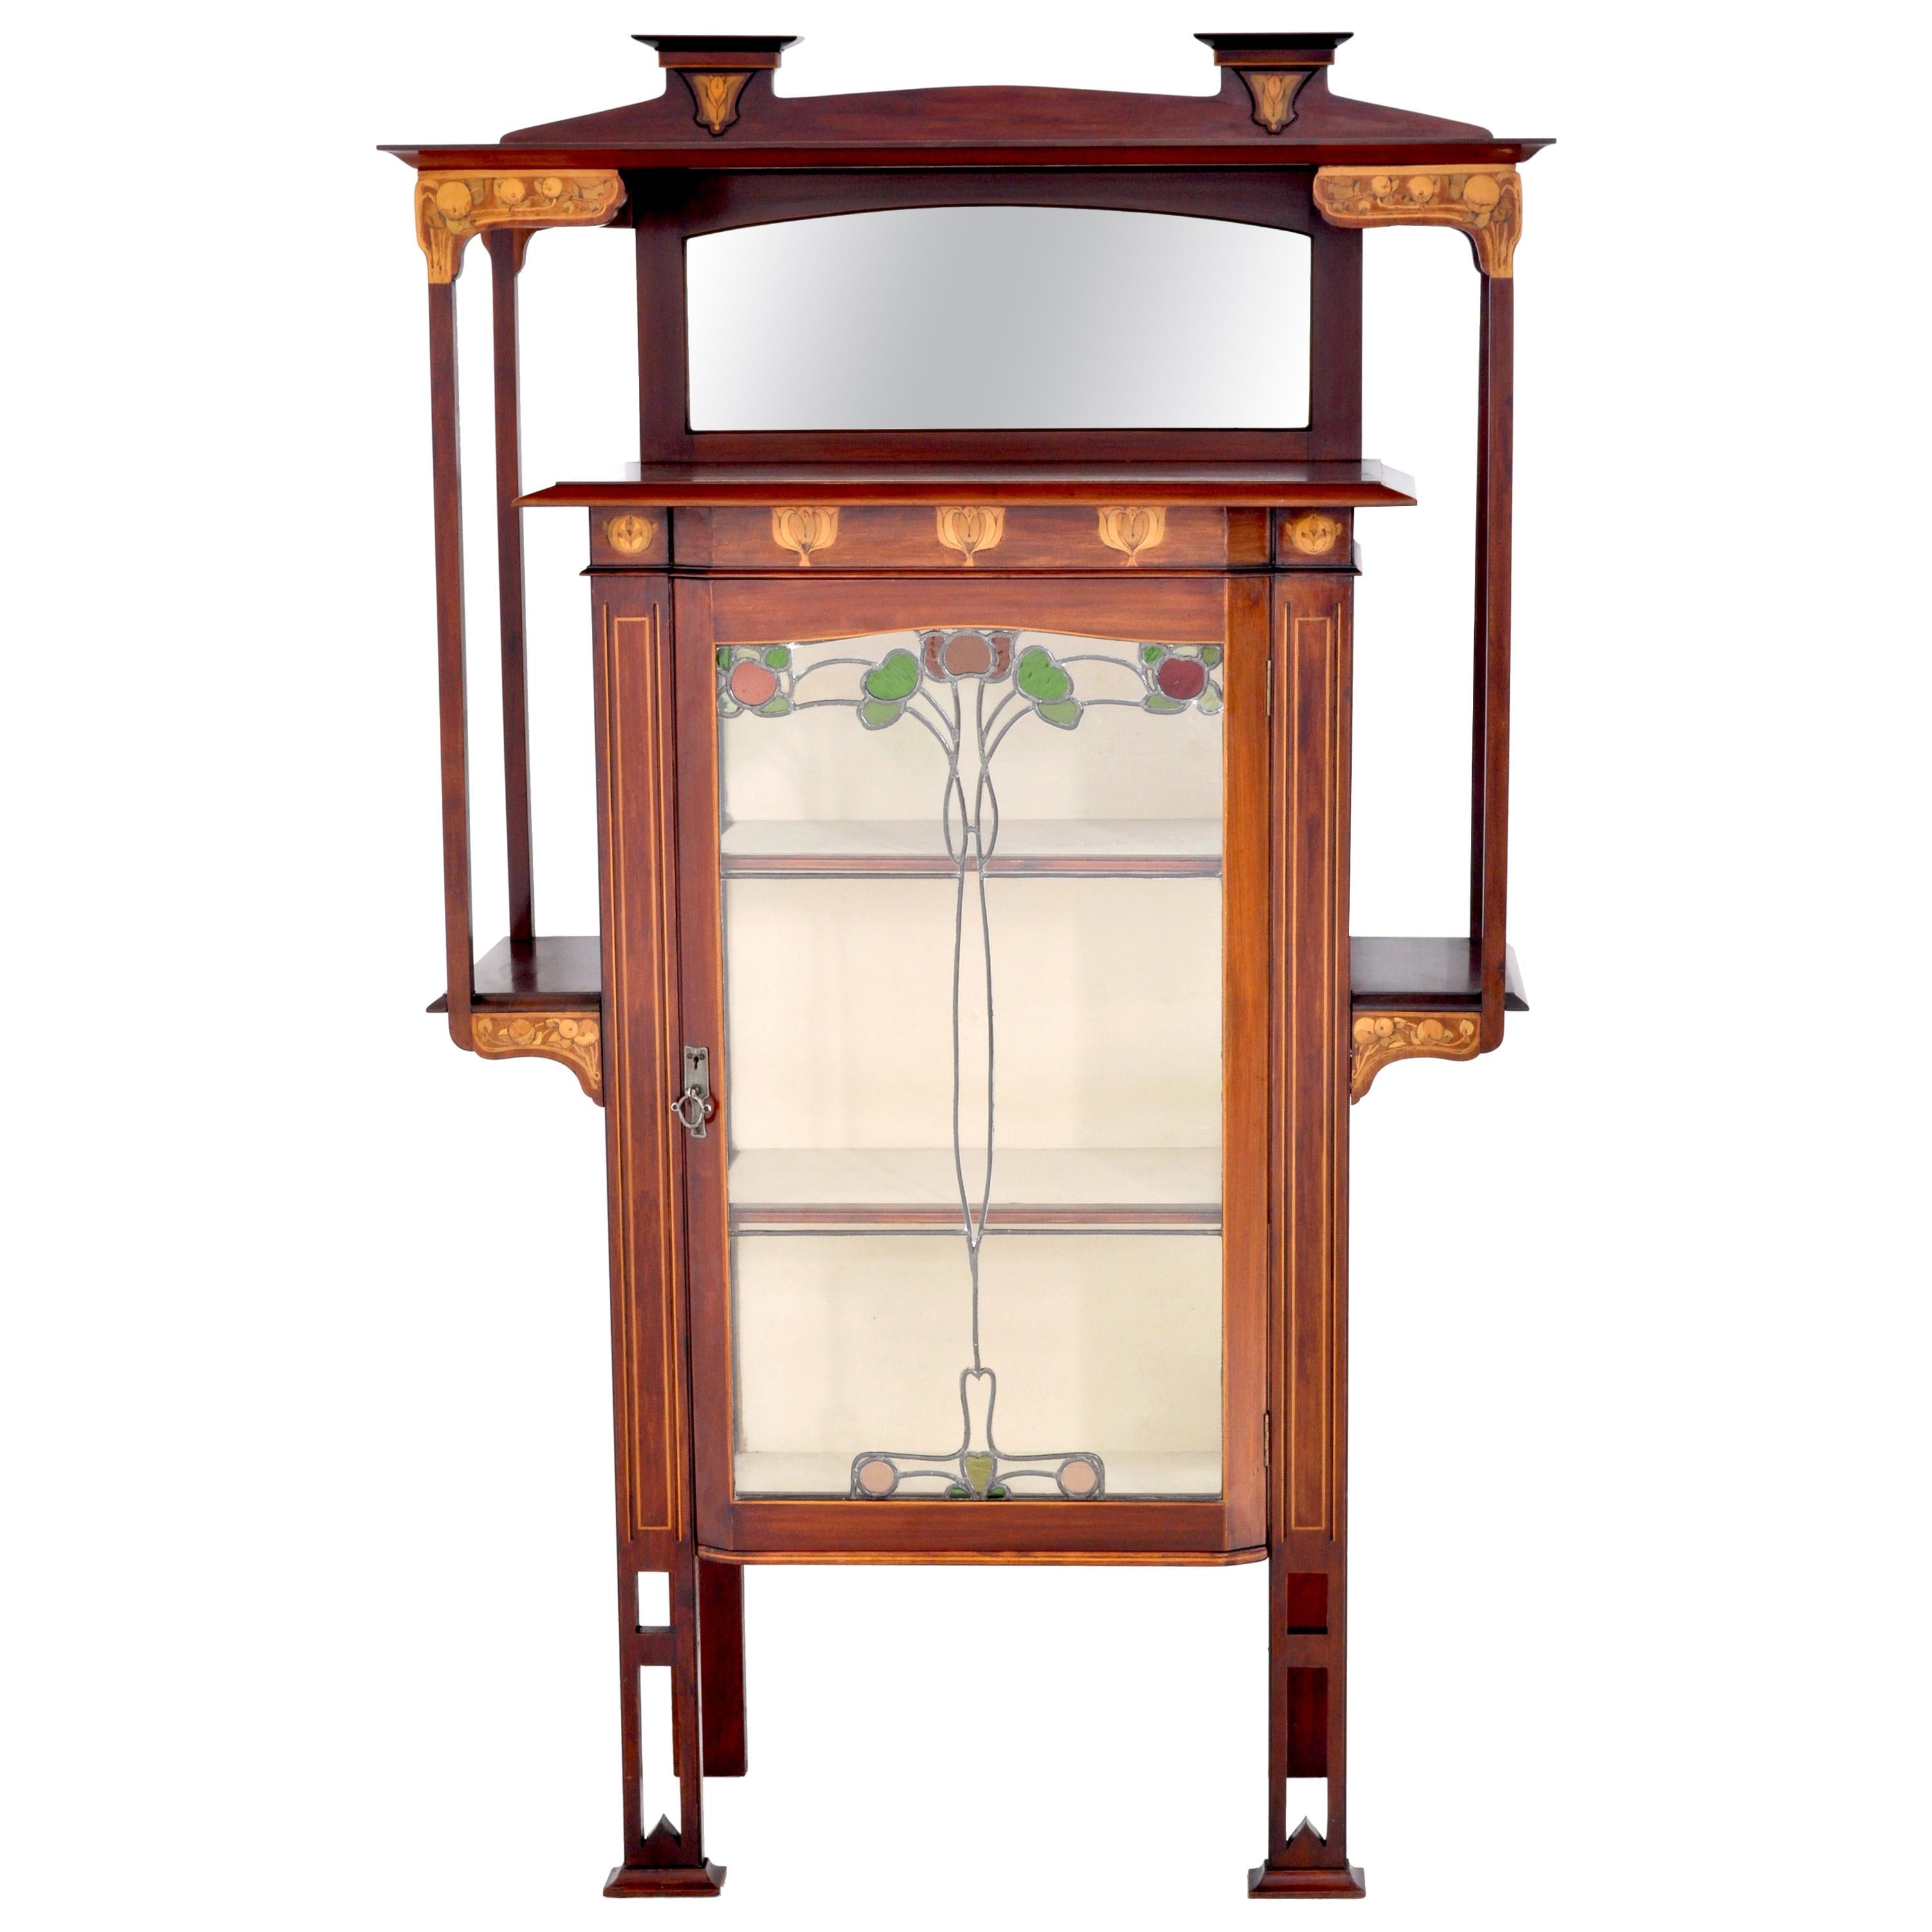 Antique Art Nouveau Inlaid Mahogany China Cabinet Shapland & Petter for Liberty